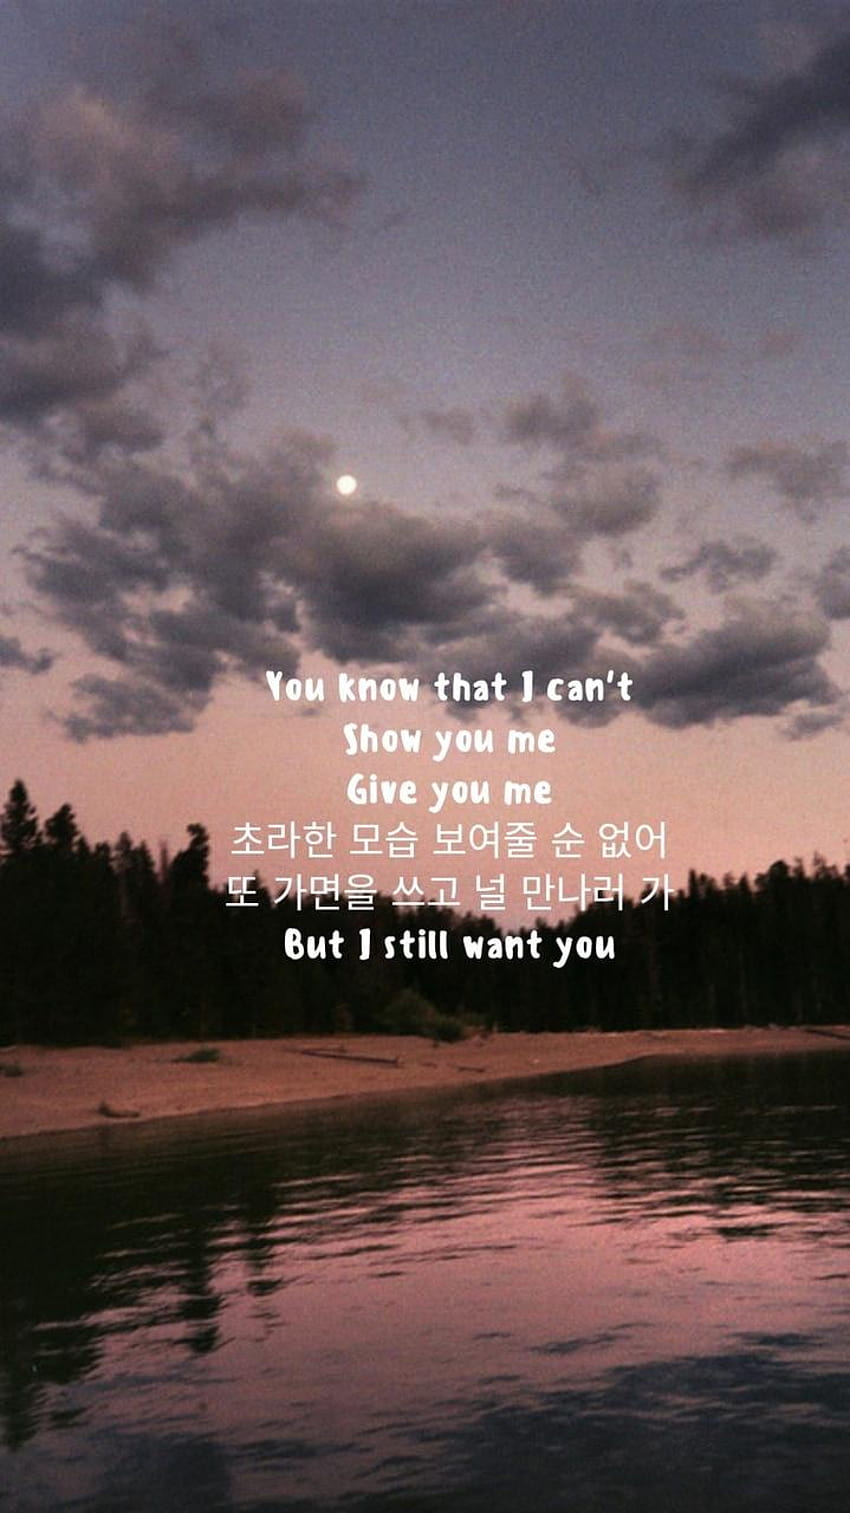 ☆.。.:*BTS song Quotes that i love.:*・°☆, bts deep quotes HD phone wallpaper